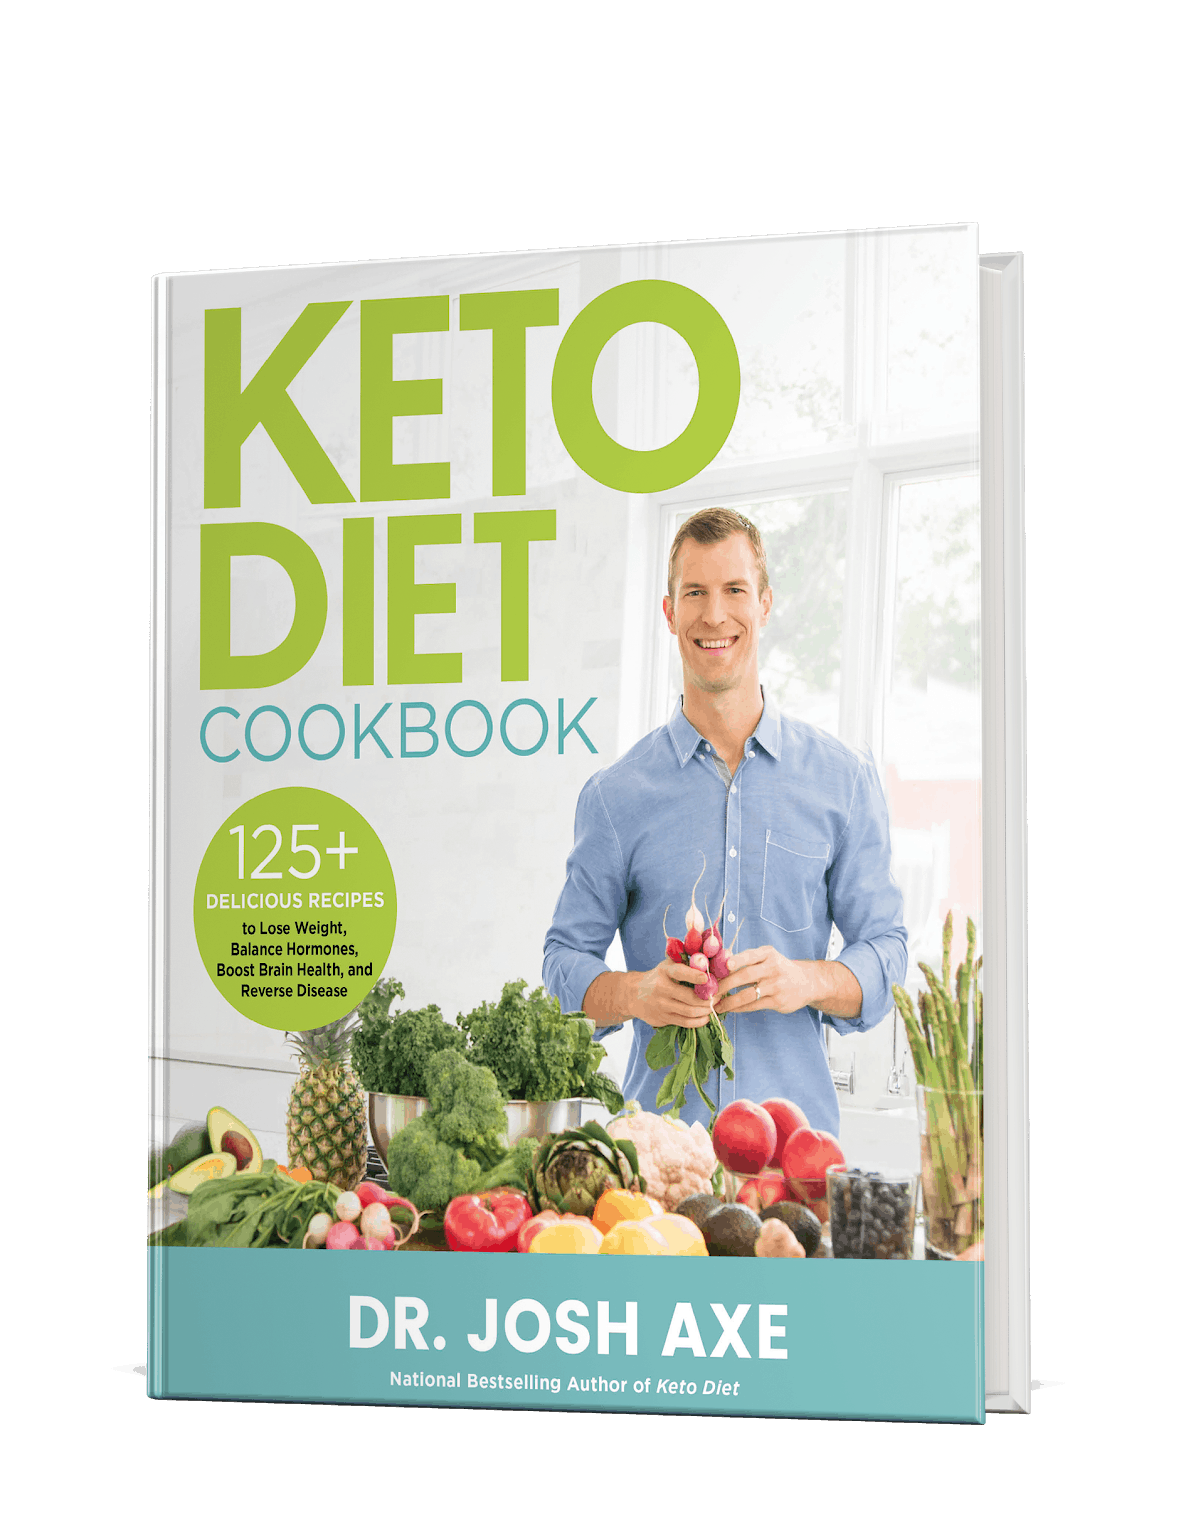  Keto Diet Cook Book cover